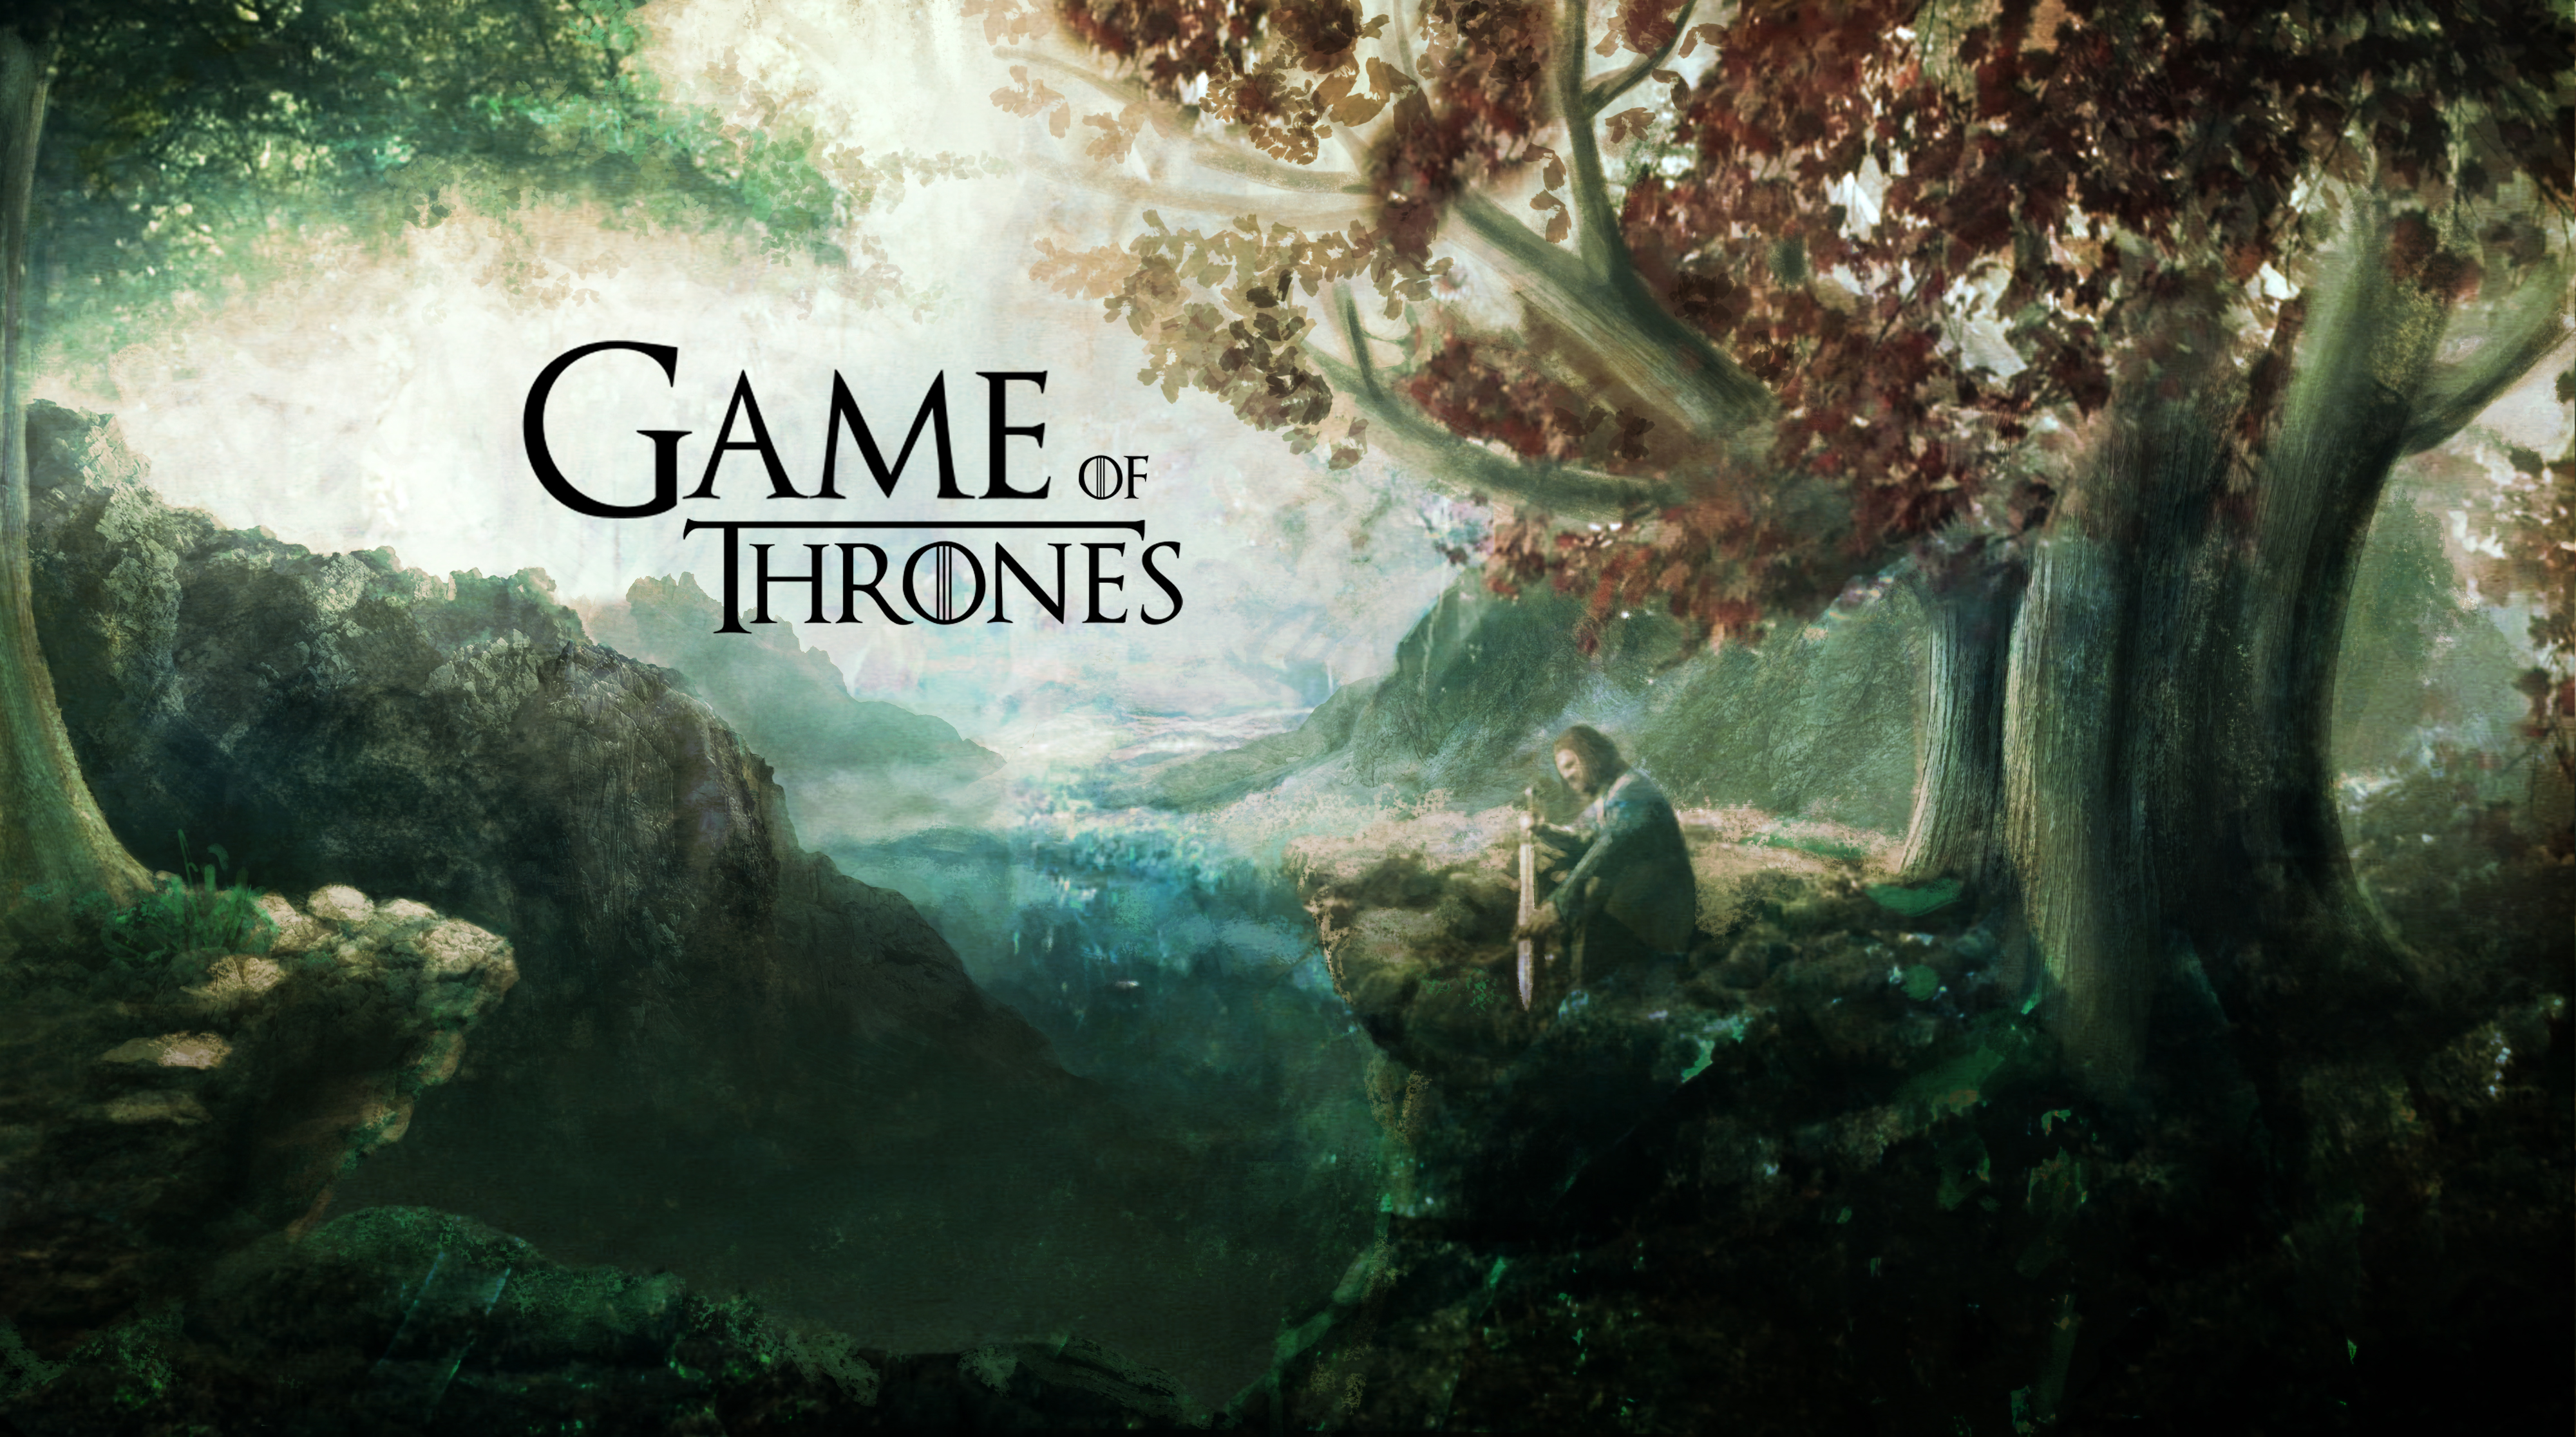 This Game of Thrones Wallpaper blew me away gameofthrones